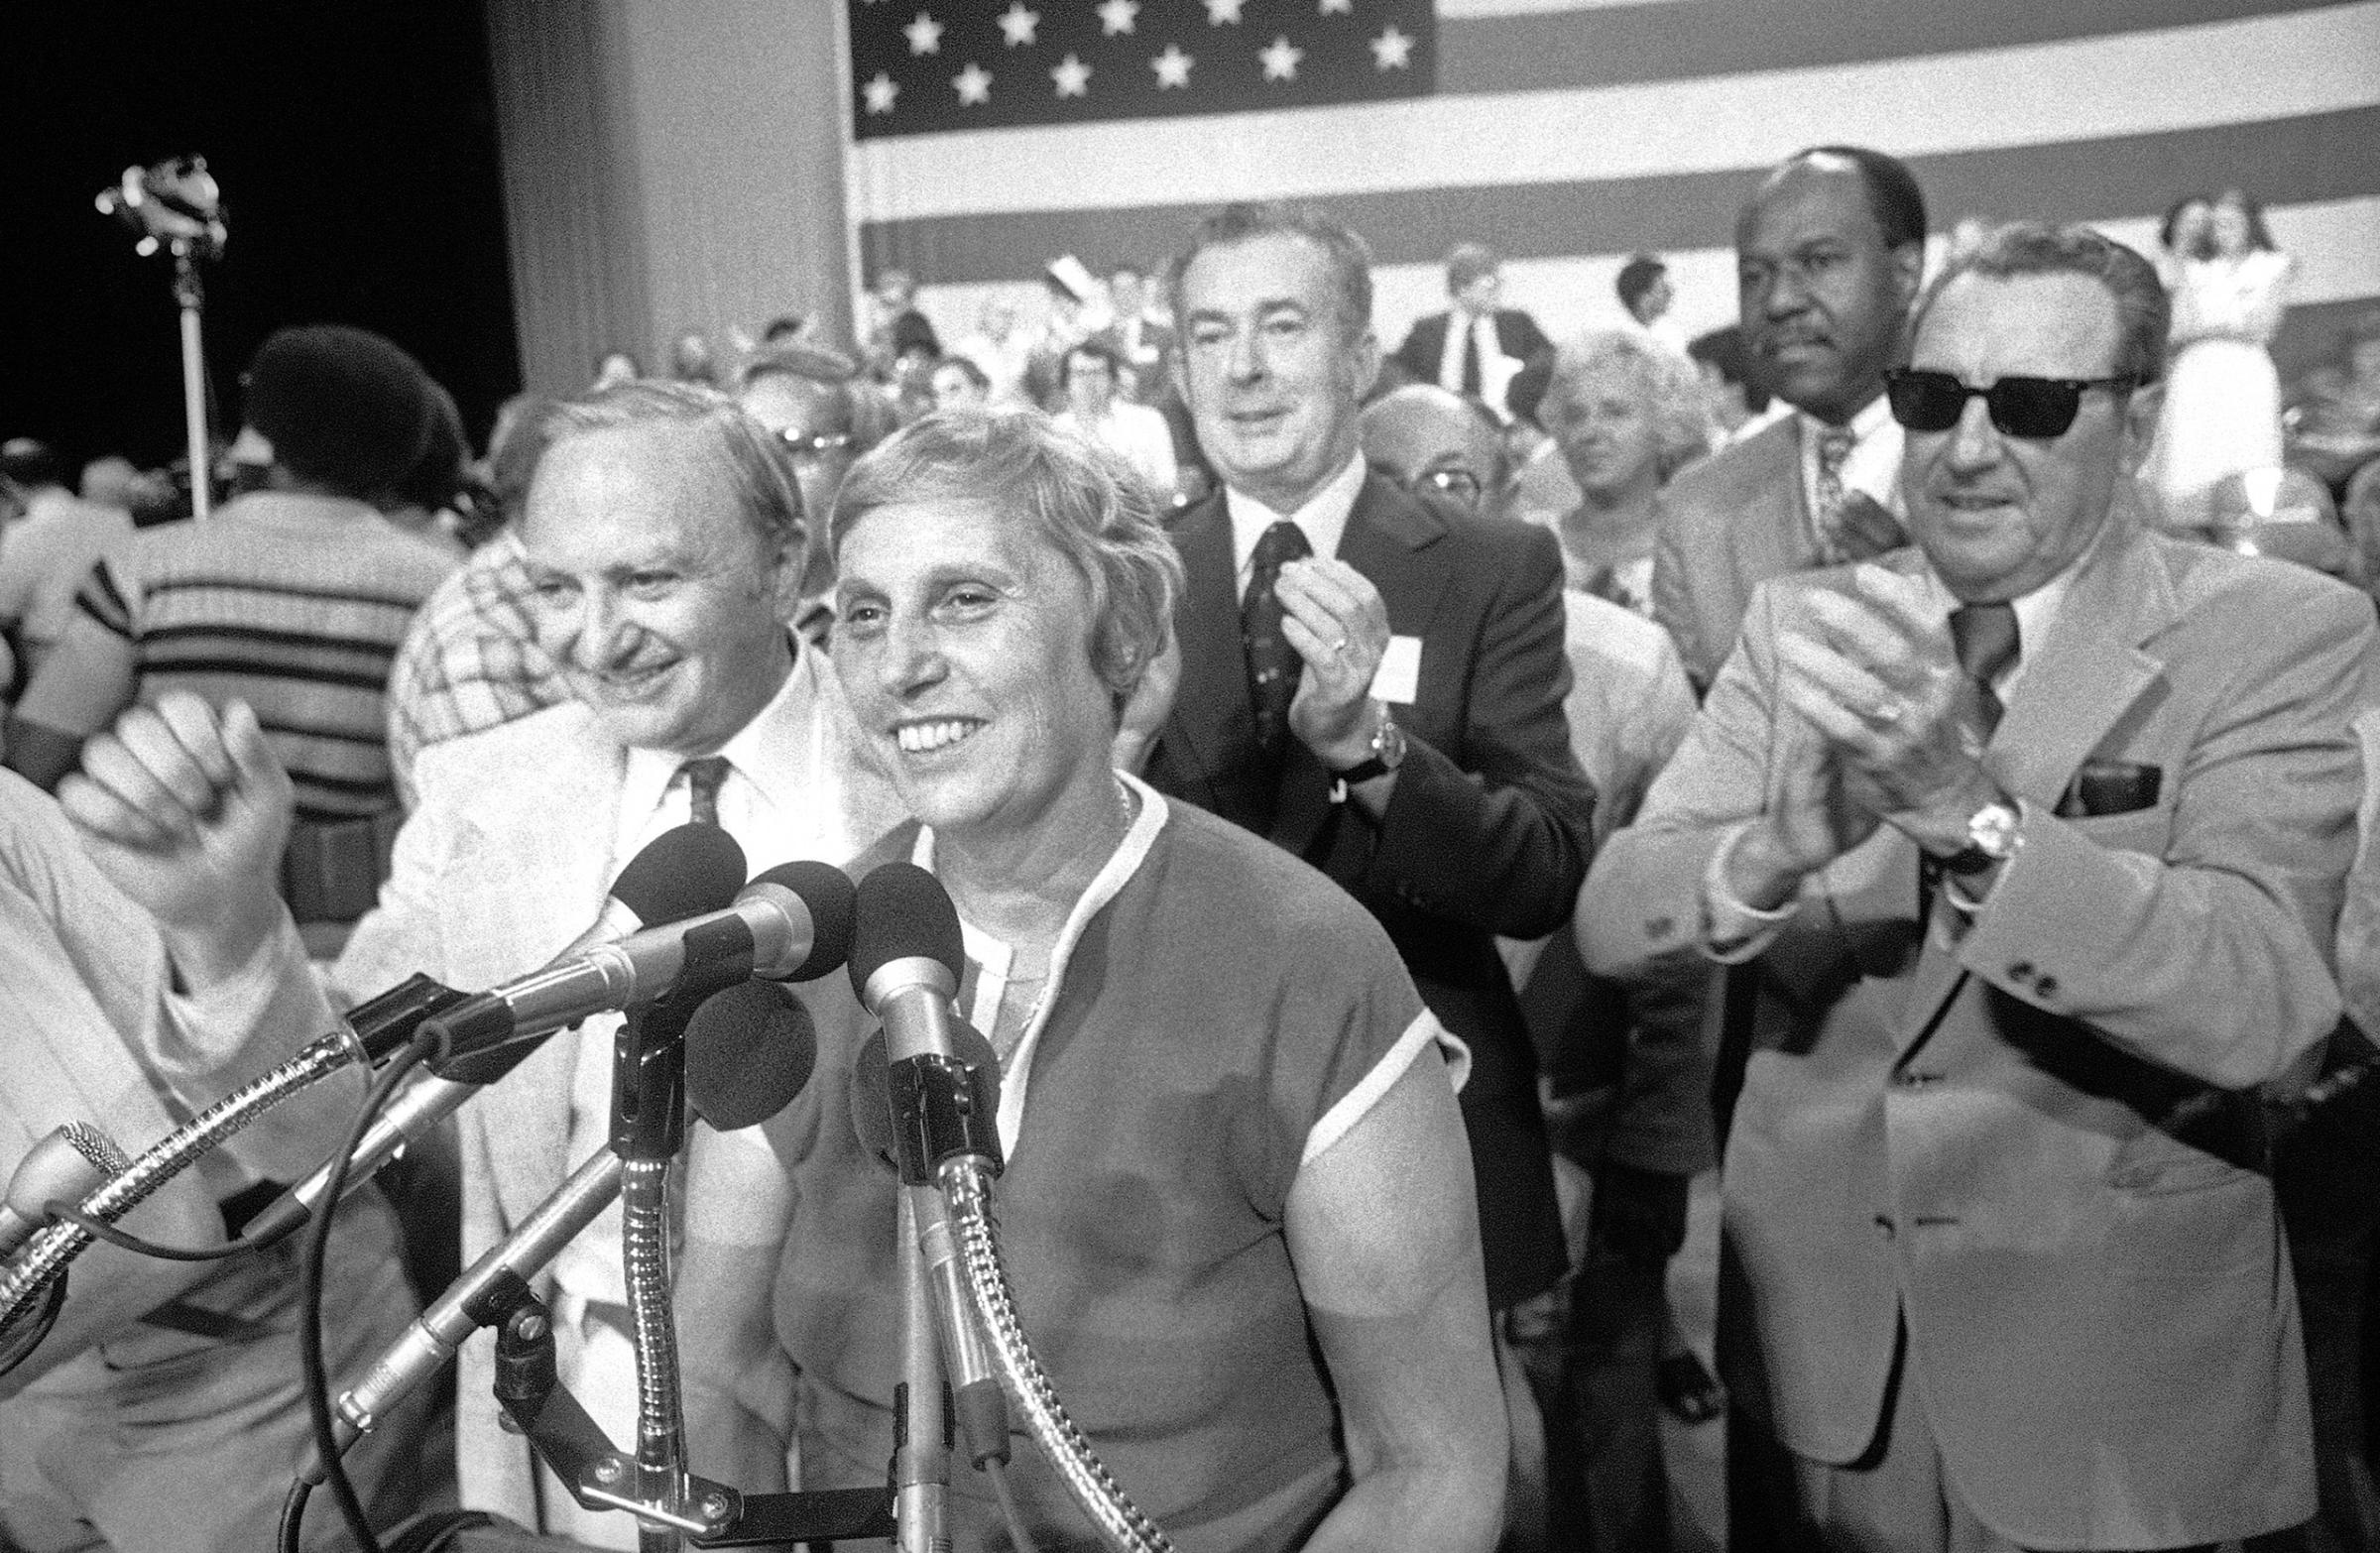 Gov. Ella T. Grasso receives the applause of the crowd as she began her acceptance speech as the party-endorsed gubernatorial candidate at the Democratic Party state nominating convention in Hartford, Connecticut on Saturday, July 22, 1978.